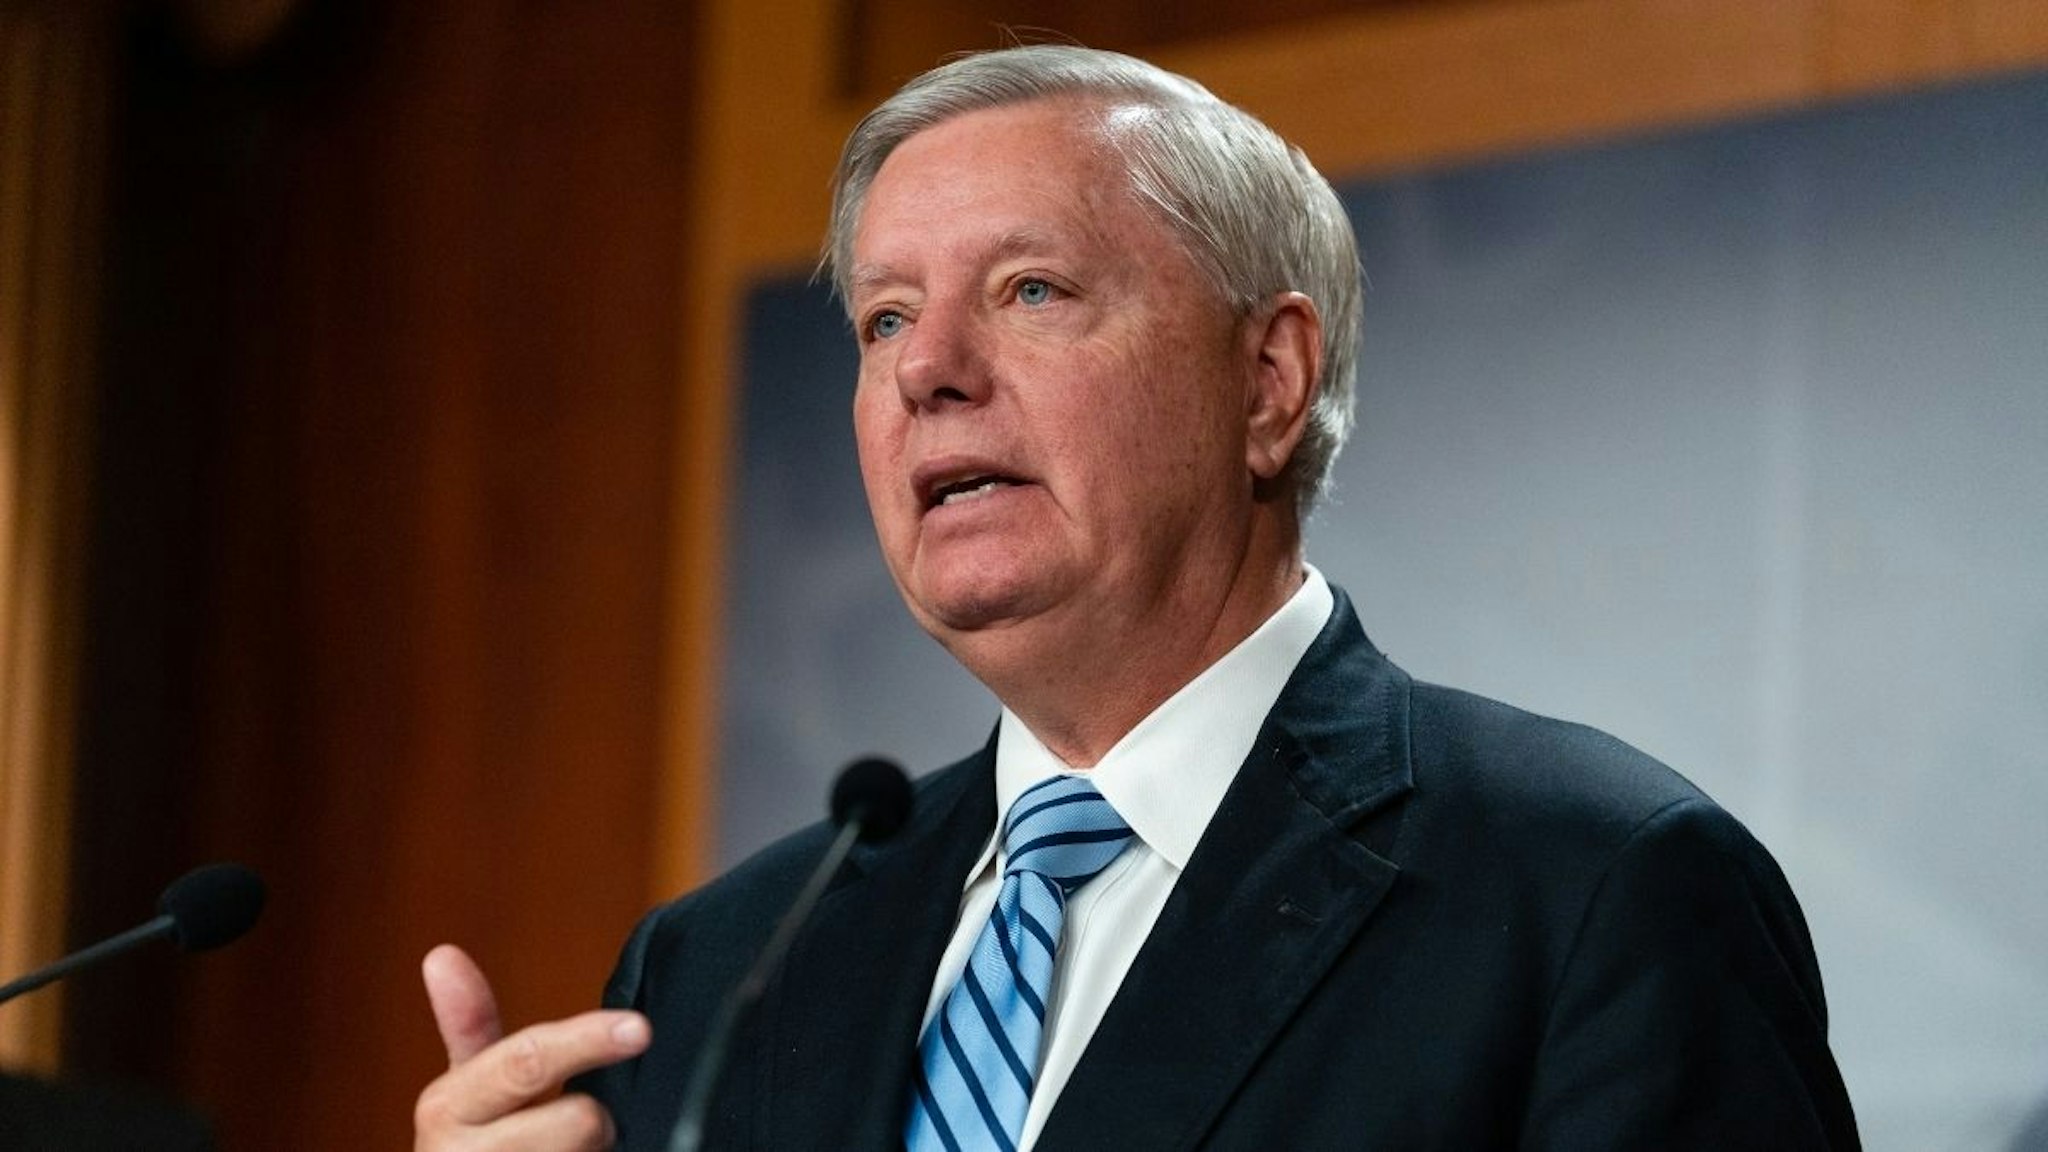 Senator Lindsey Graham, a Republican from South Carolina, speaks during a news conference about the nomination of Ketanji Brown Jackson, associate justice of the U.S. Supreme Court nominee for U.S. President Joe Biden, at the U.S. Capitol in Washington, D.C., U.S., on Thursday, April 7, 2022.